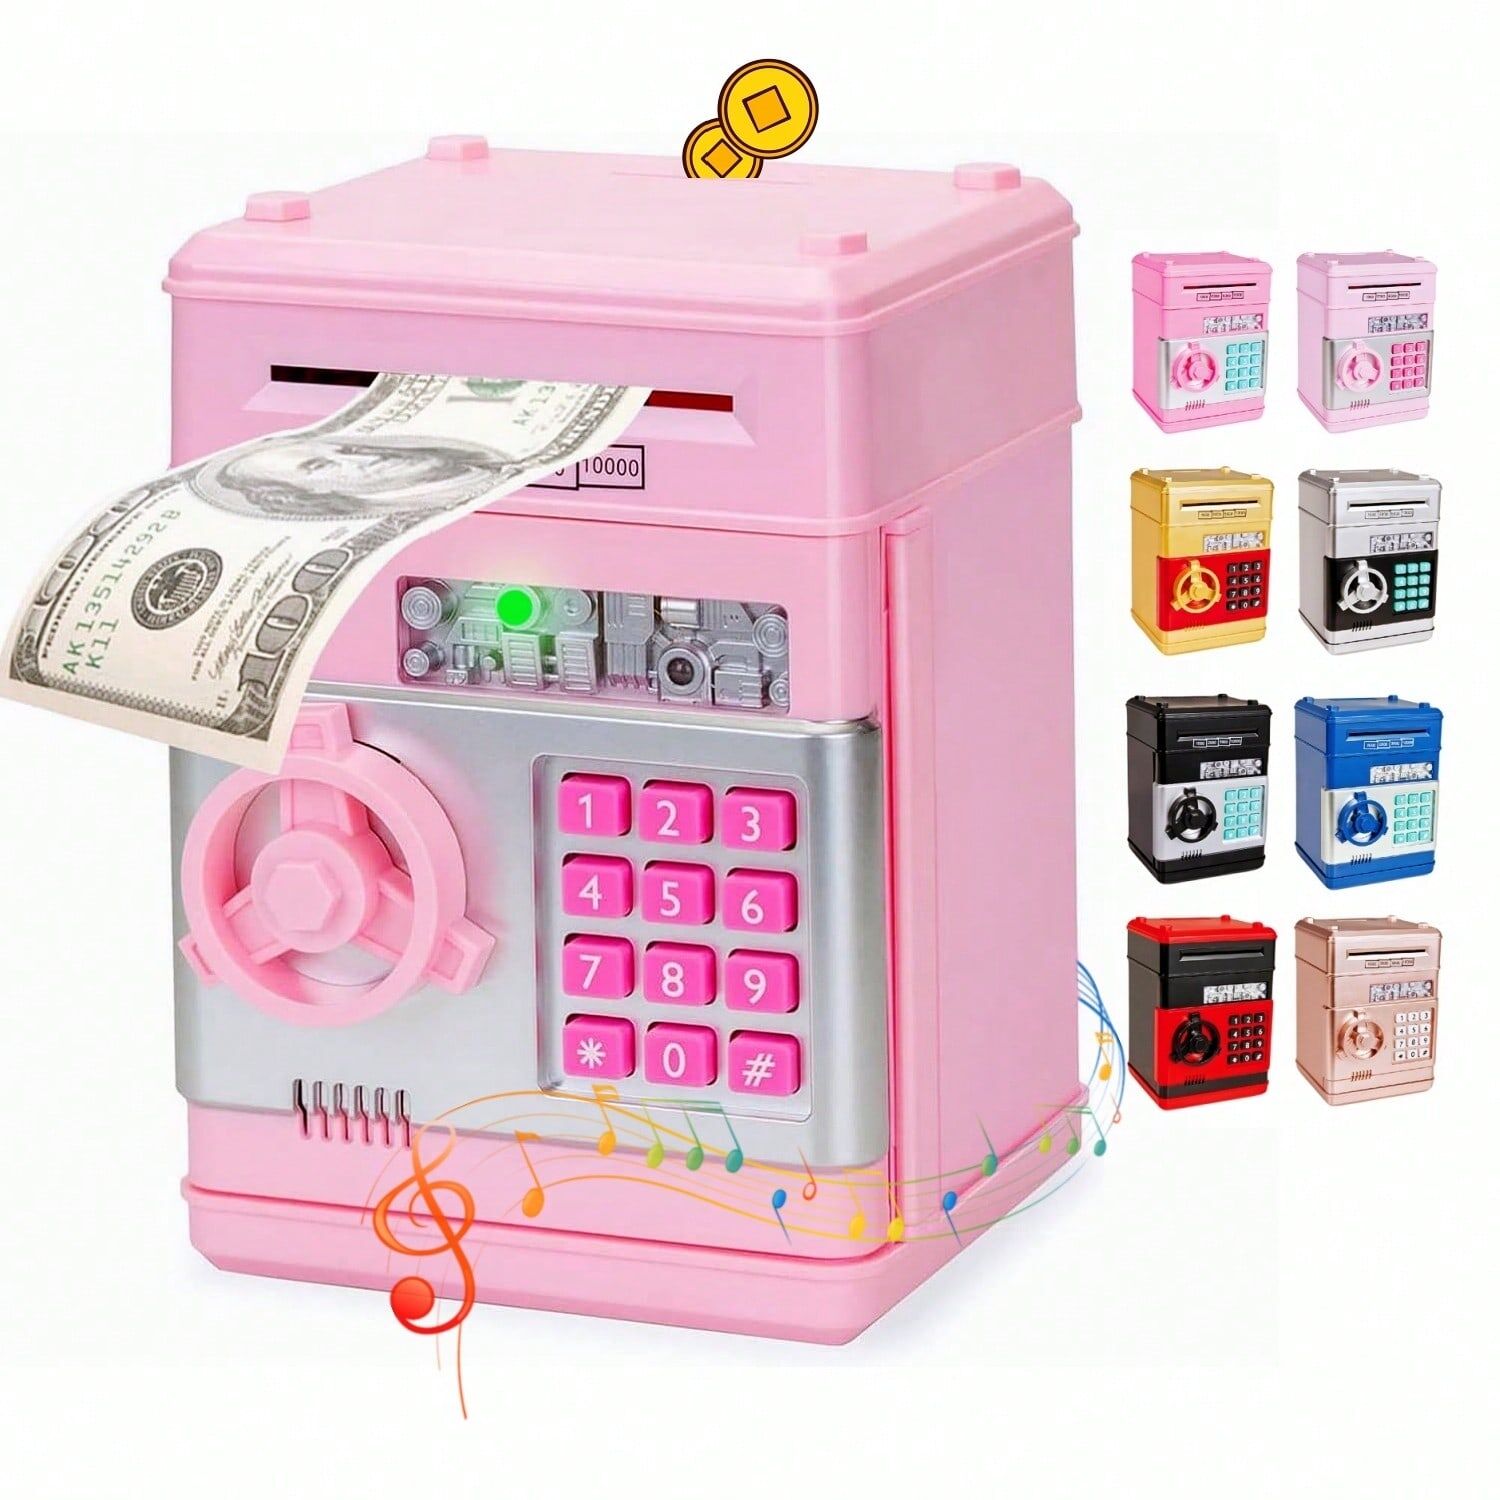 SHEIN Electronic Piggy Bank For Kids, ATM Bank Safe Toys Cash Coin Can Money Saving Box For Boys Girls, Cute Stuff ATM Machine Gifts For 3 4 5 6 7 8 9 10 Year Old Children, Banknotes And Coins Not Included, Light Pink Baby Pink one-size